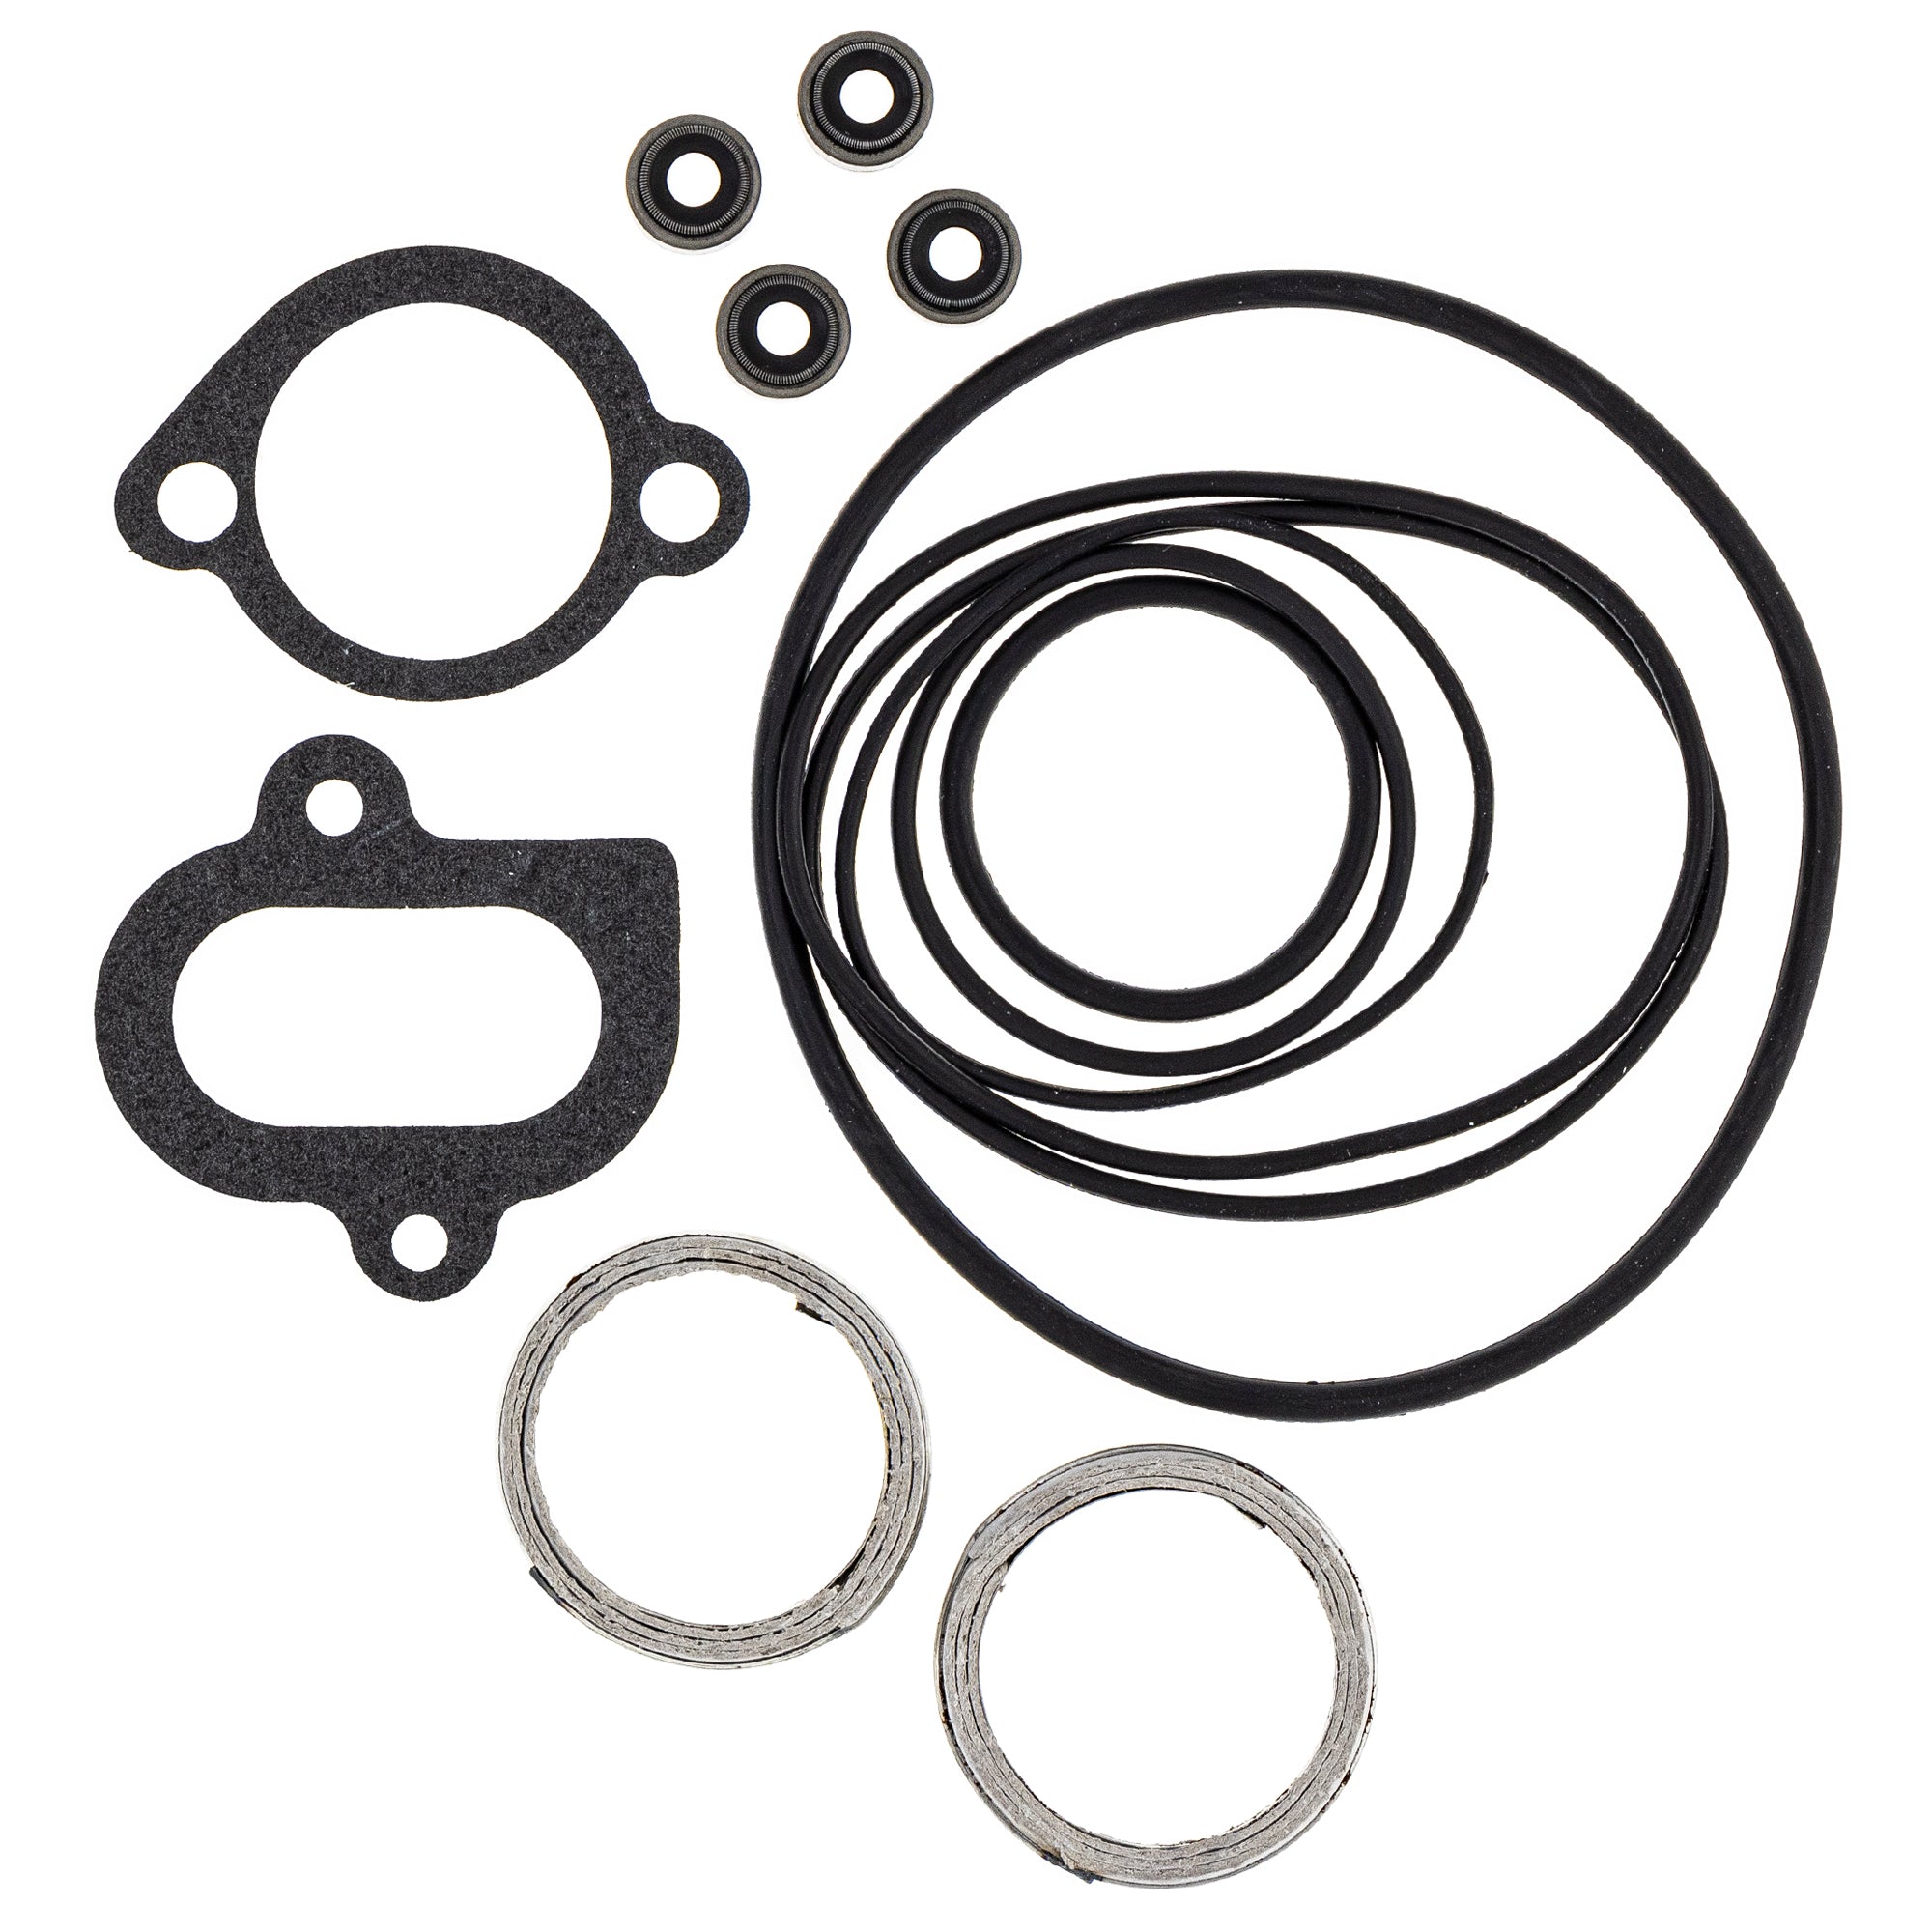 105.5mm 12.5:1 Big Bore Top End Repair Kit for Yamaha Grizzly Viking